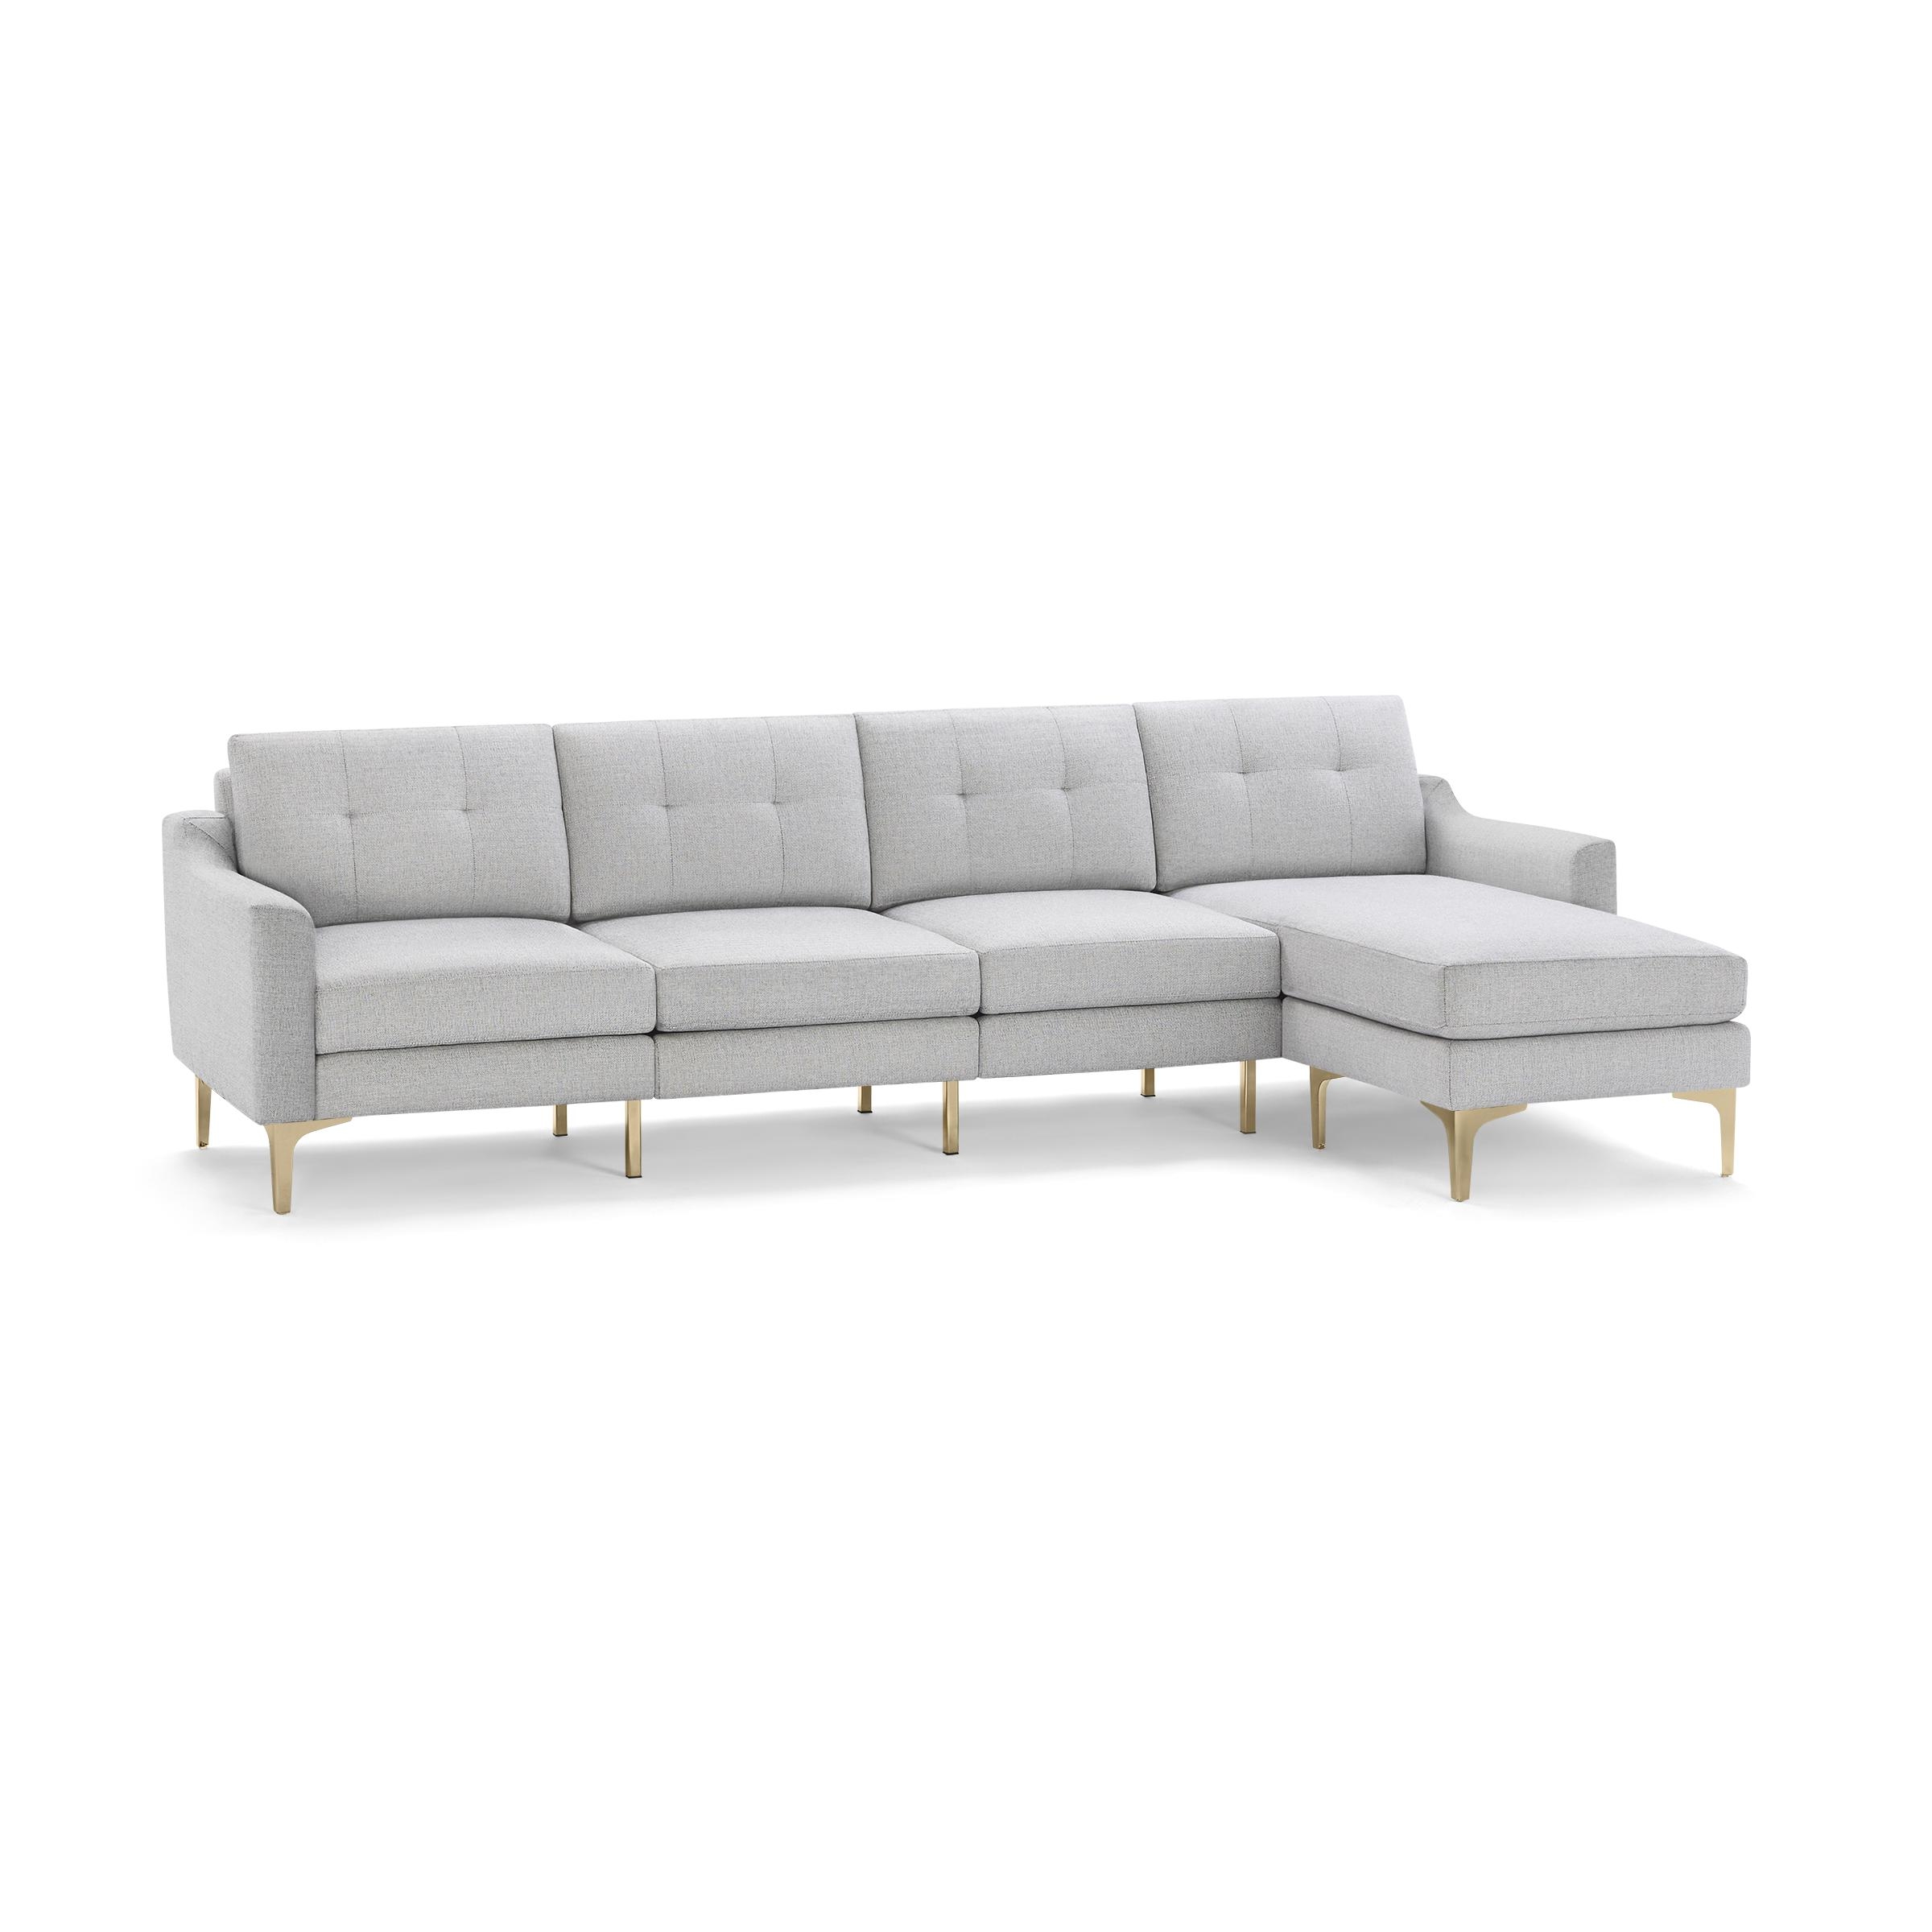 Nomad King Sectional in Crushed Gravel, Brass Legs - Image 0